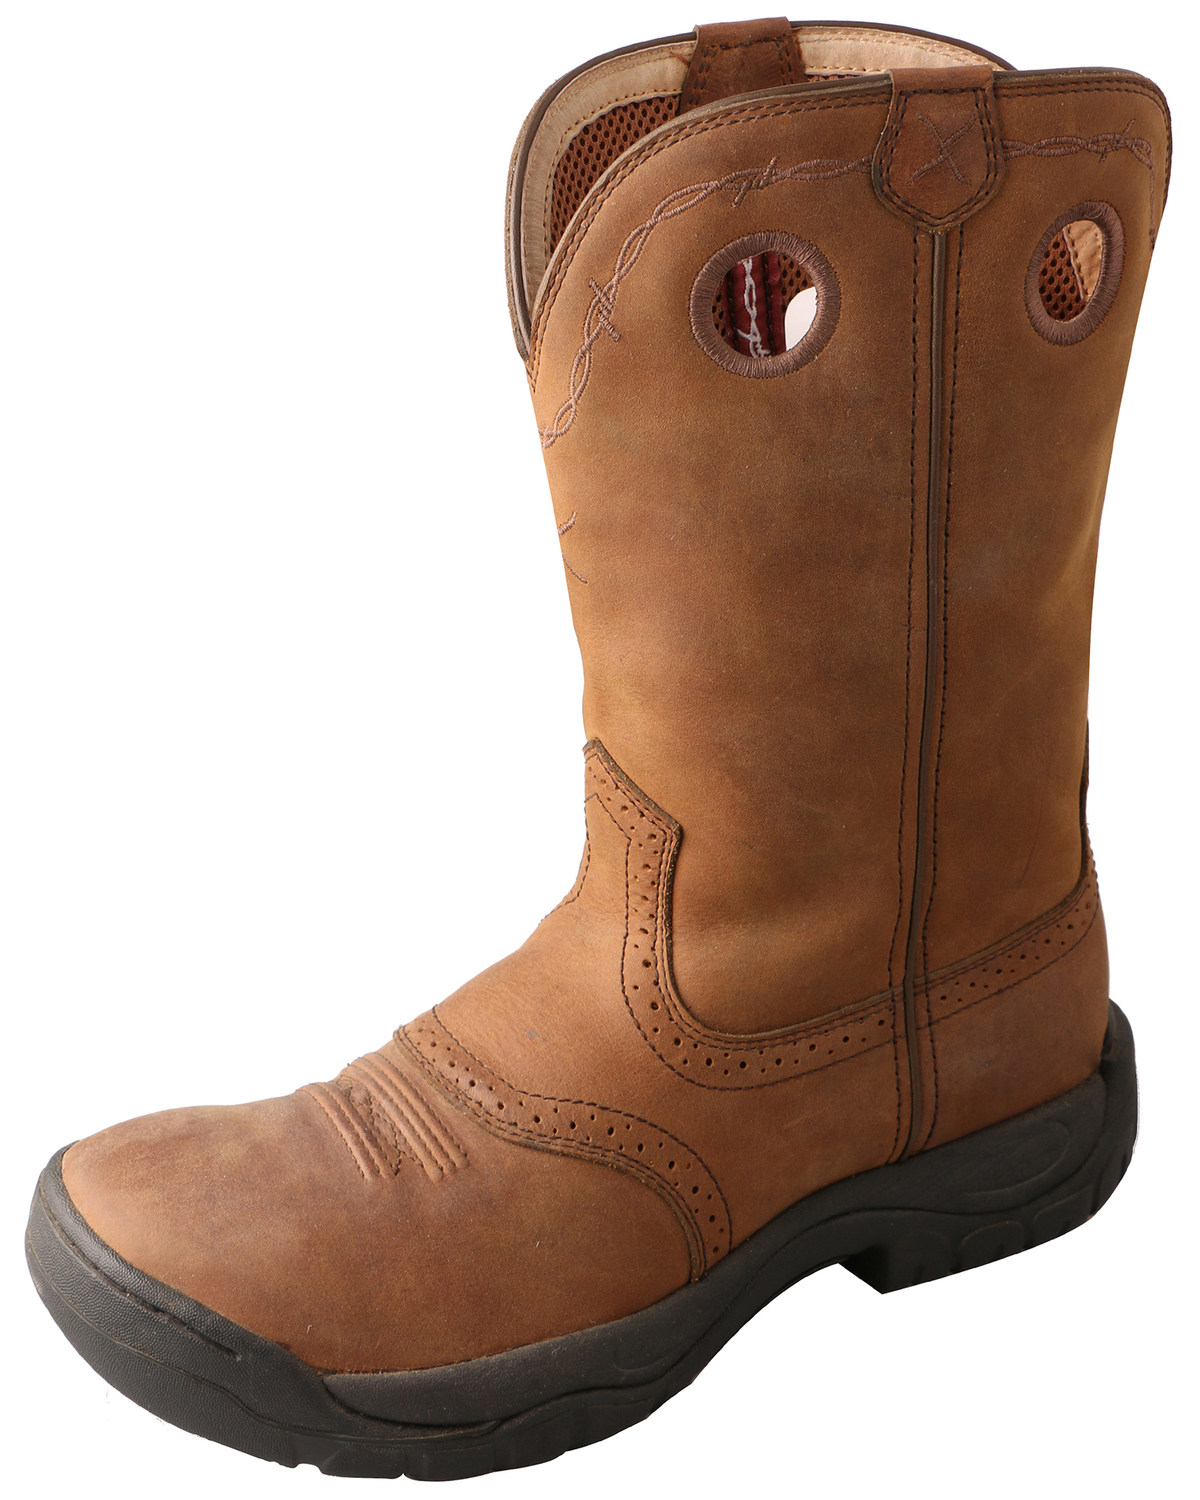 Twisted X Men's All Around Barn Boots - Round Toe